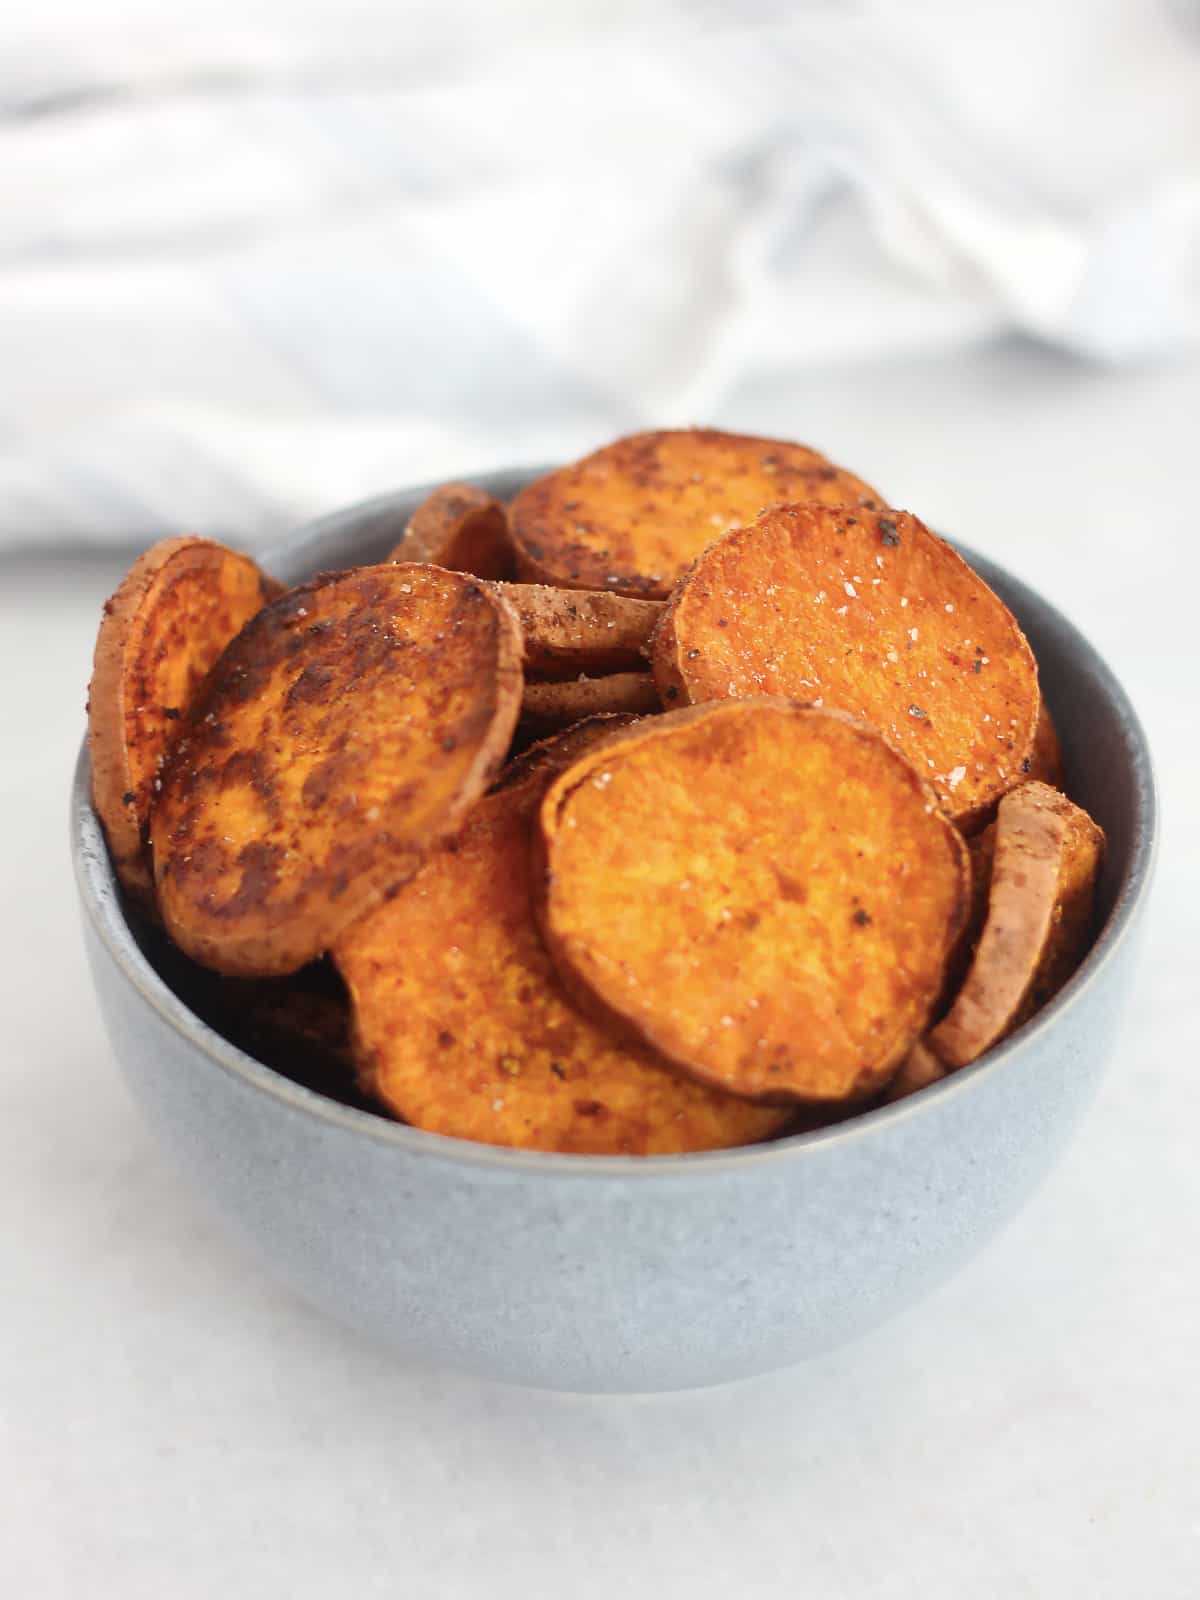 A bowl of baked sweet potato slices.